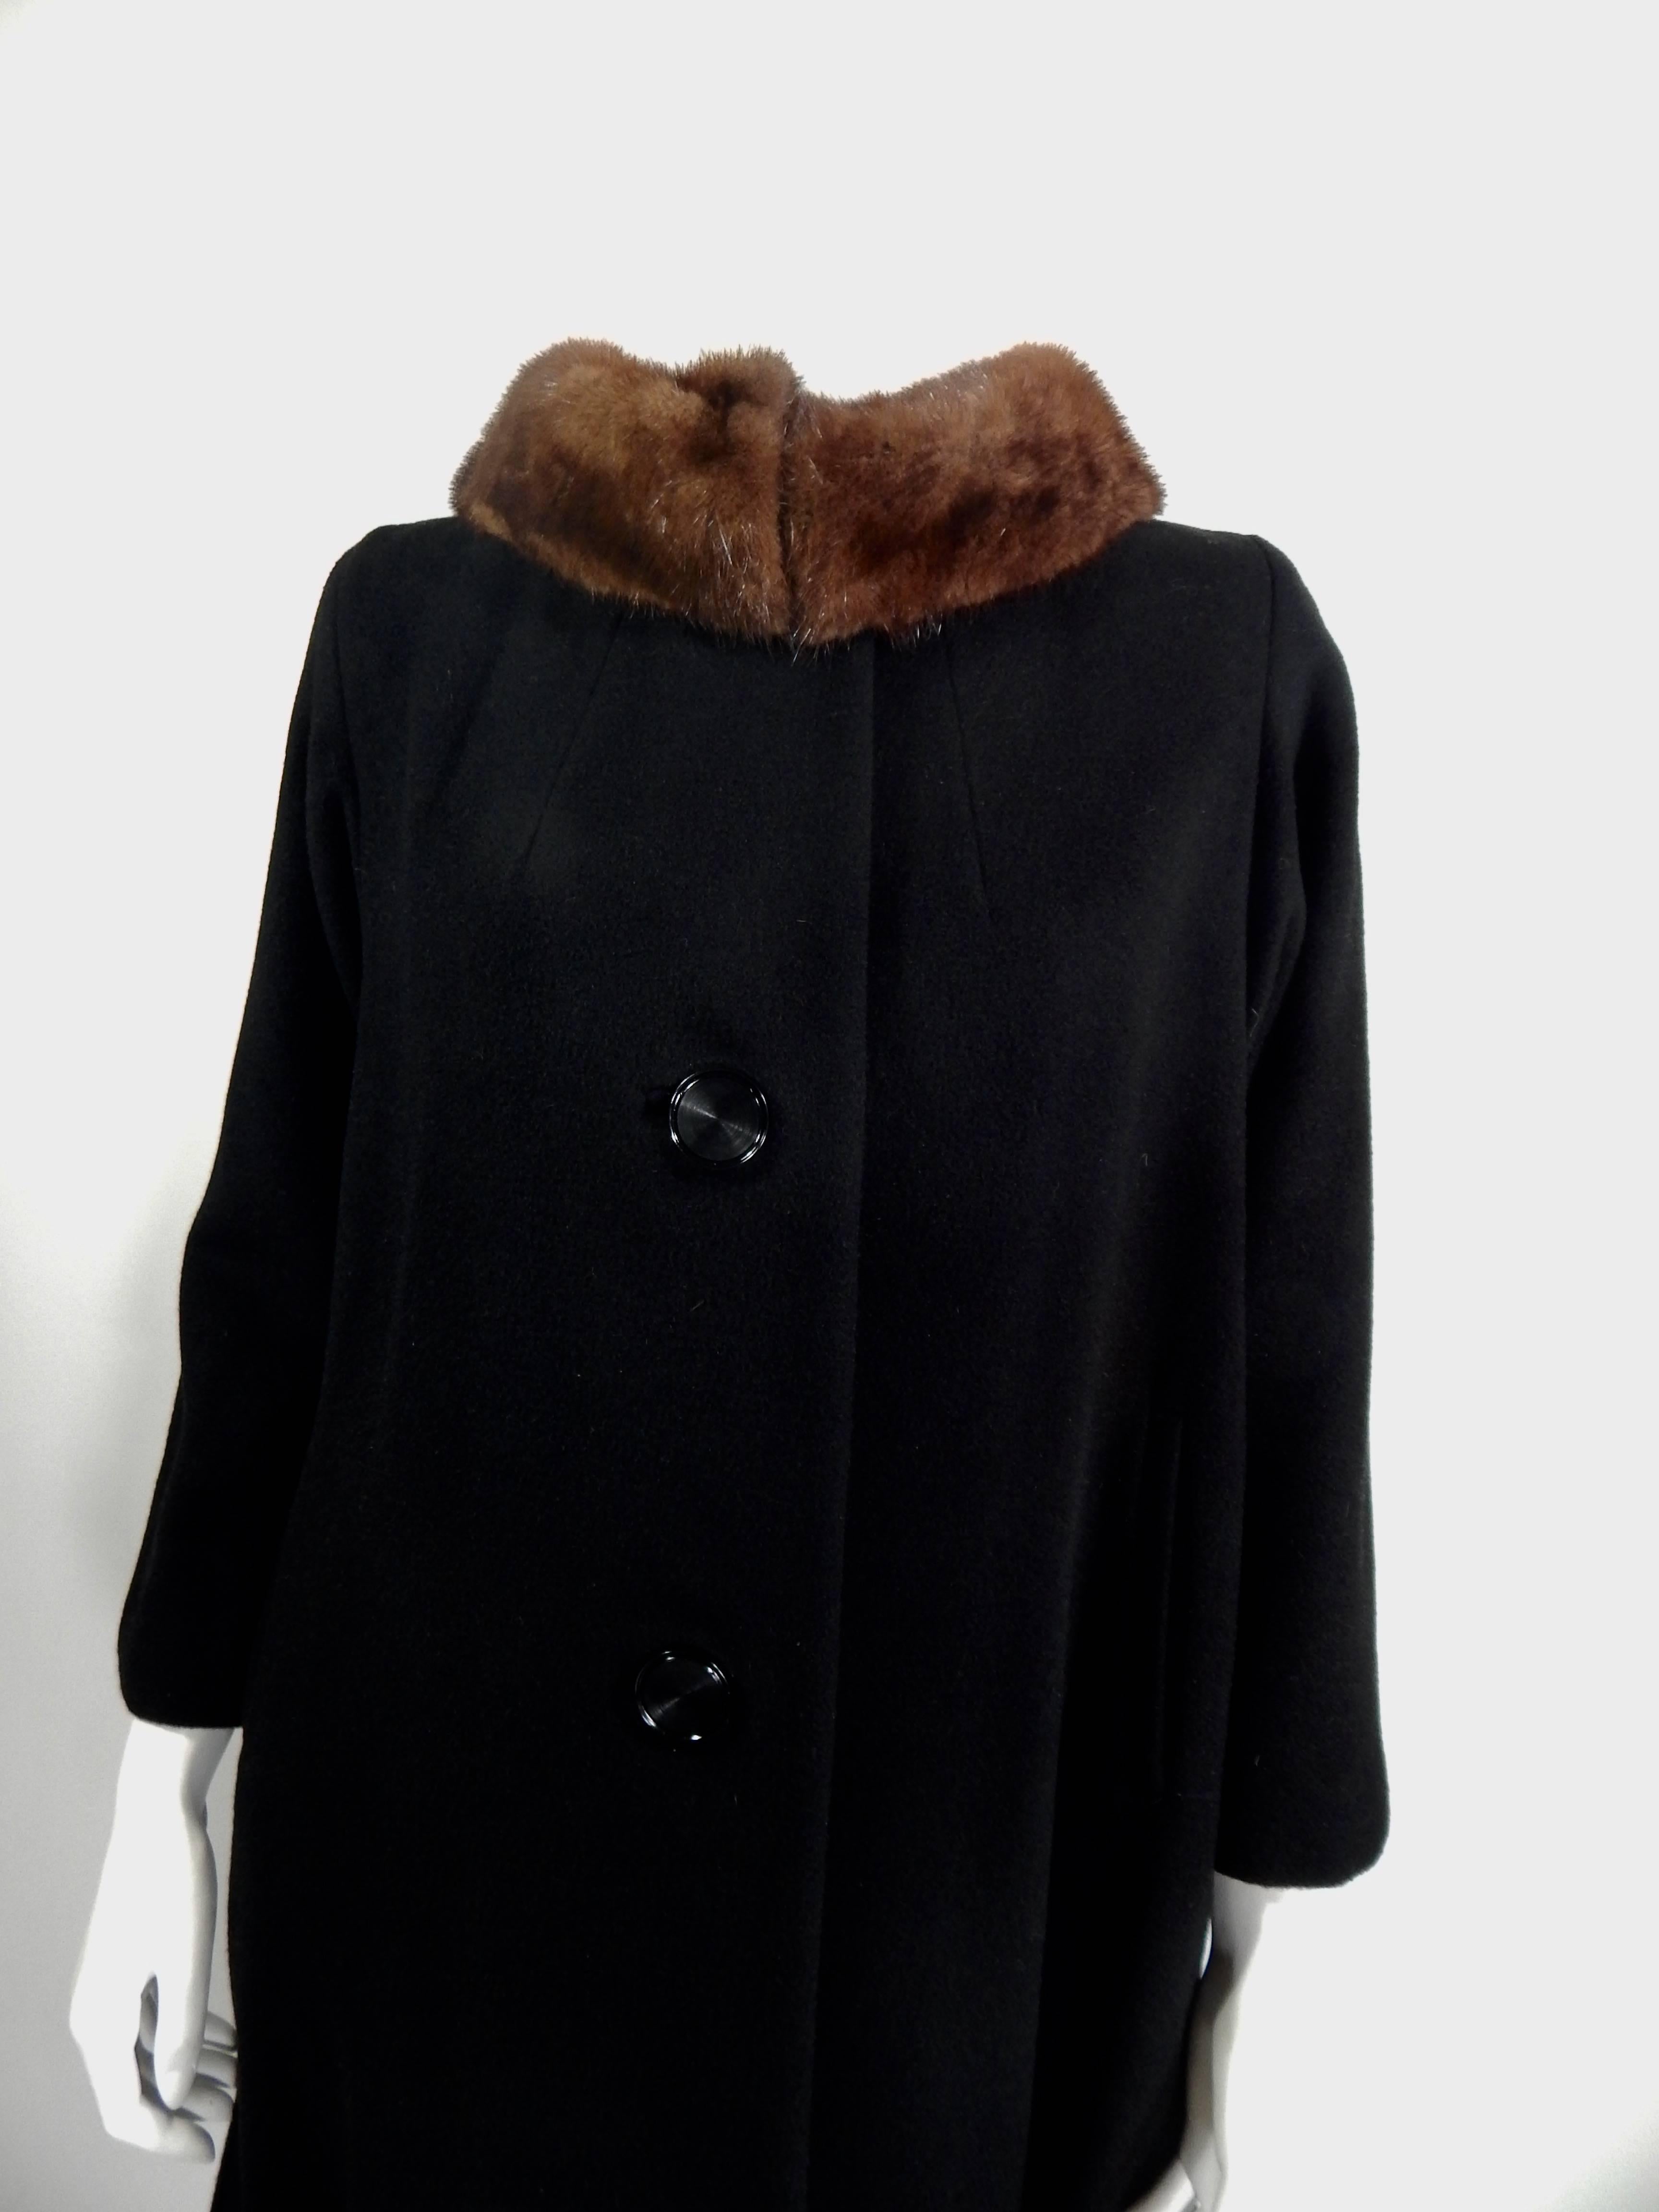 Black Cashmere and Mink Fur Coat, 1950s   In Excellent Condition For Sale In Long Island City, NY